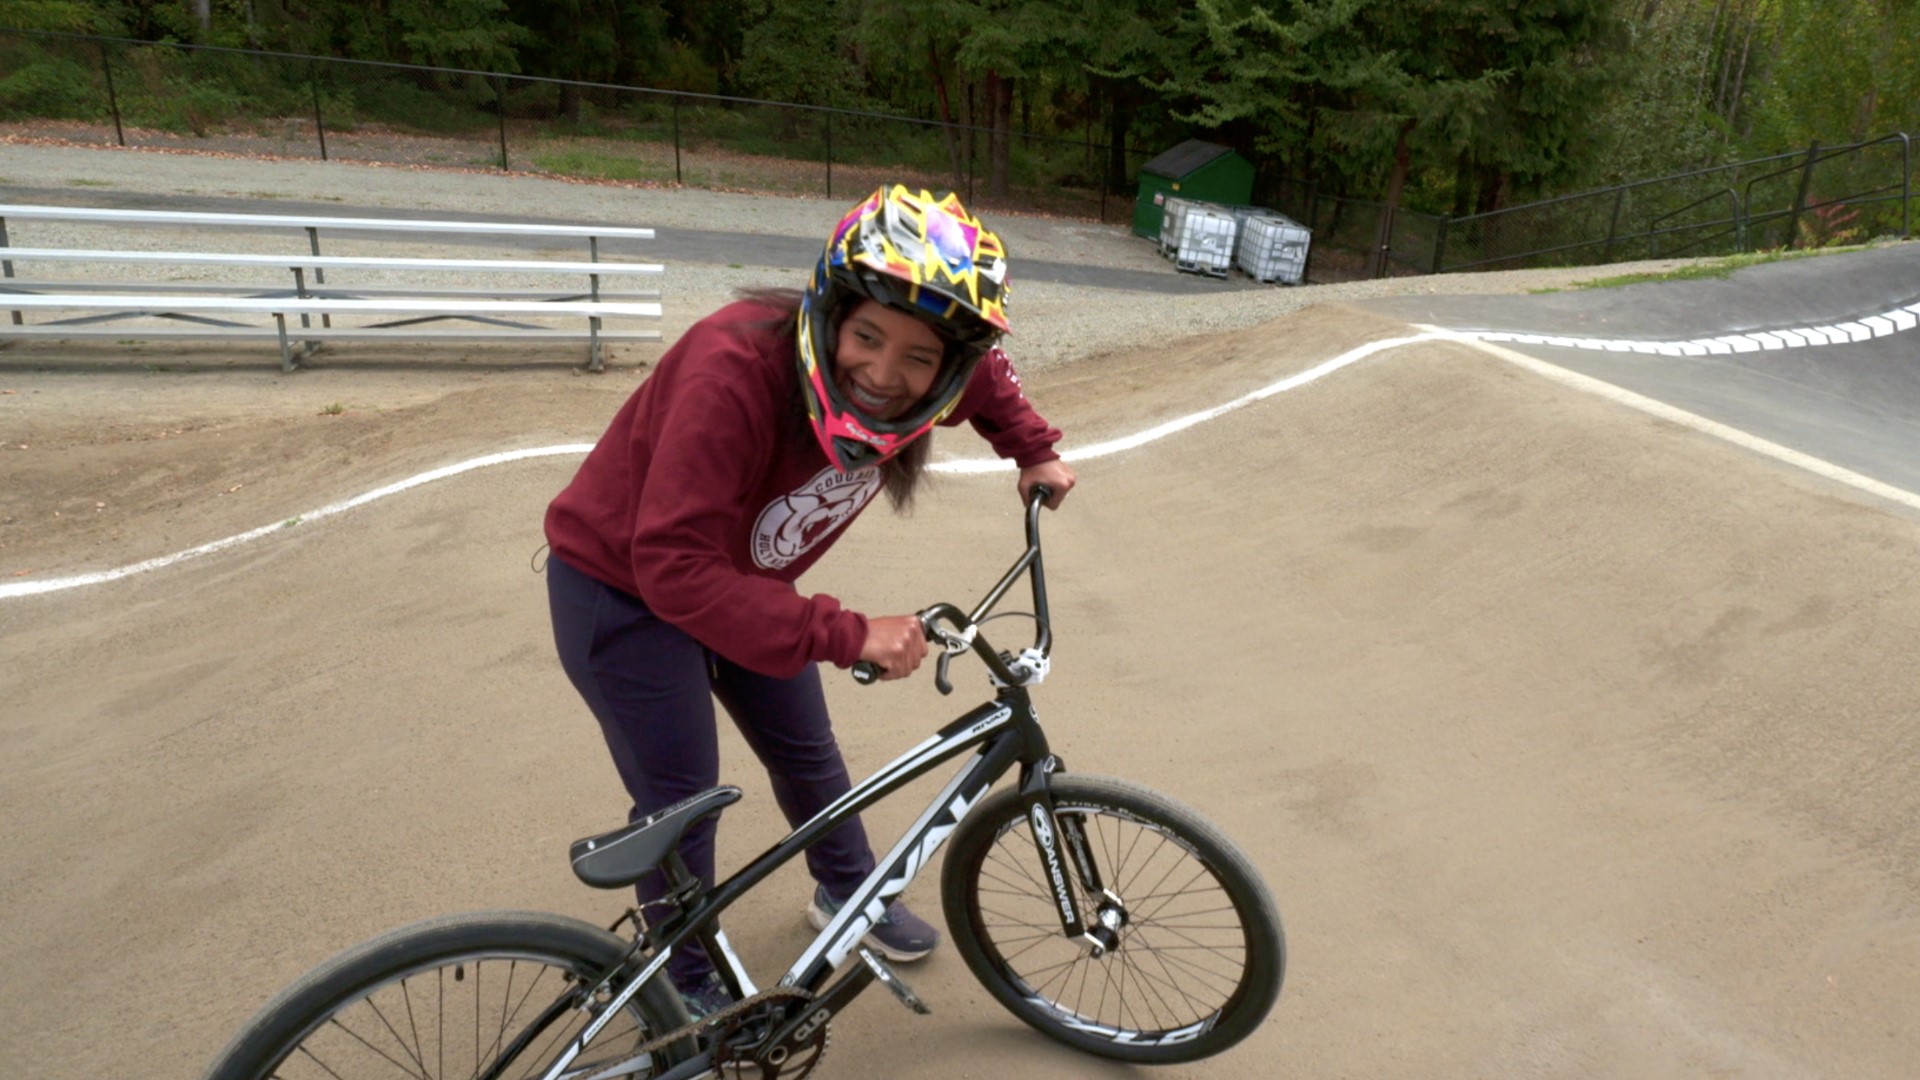 Seatac BMX welcomes riders from 18 months to 80 years old. #k5evening